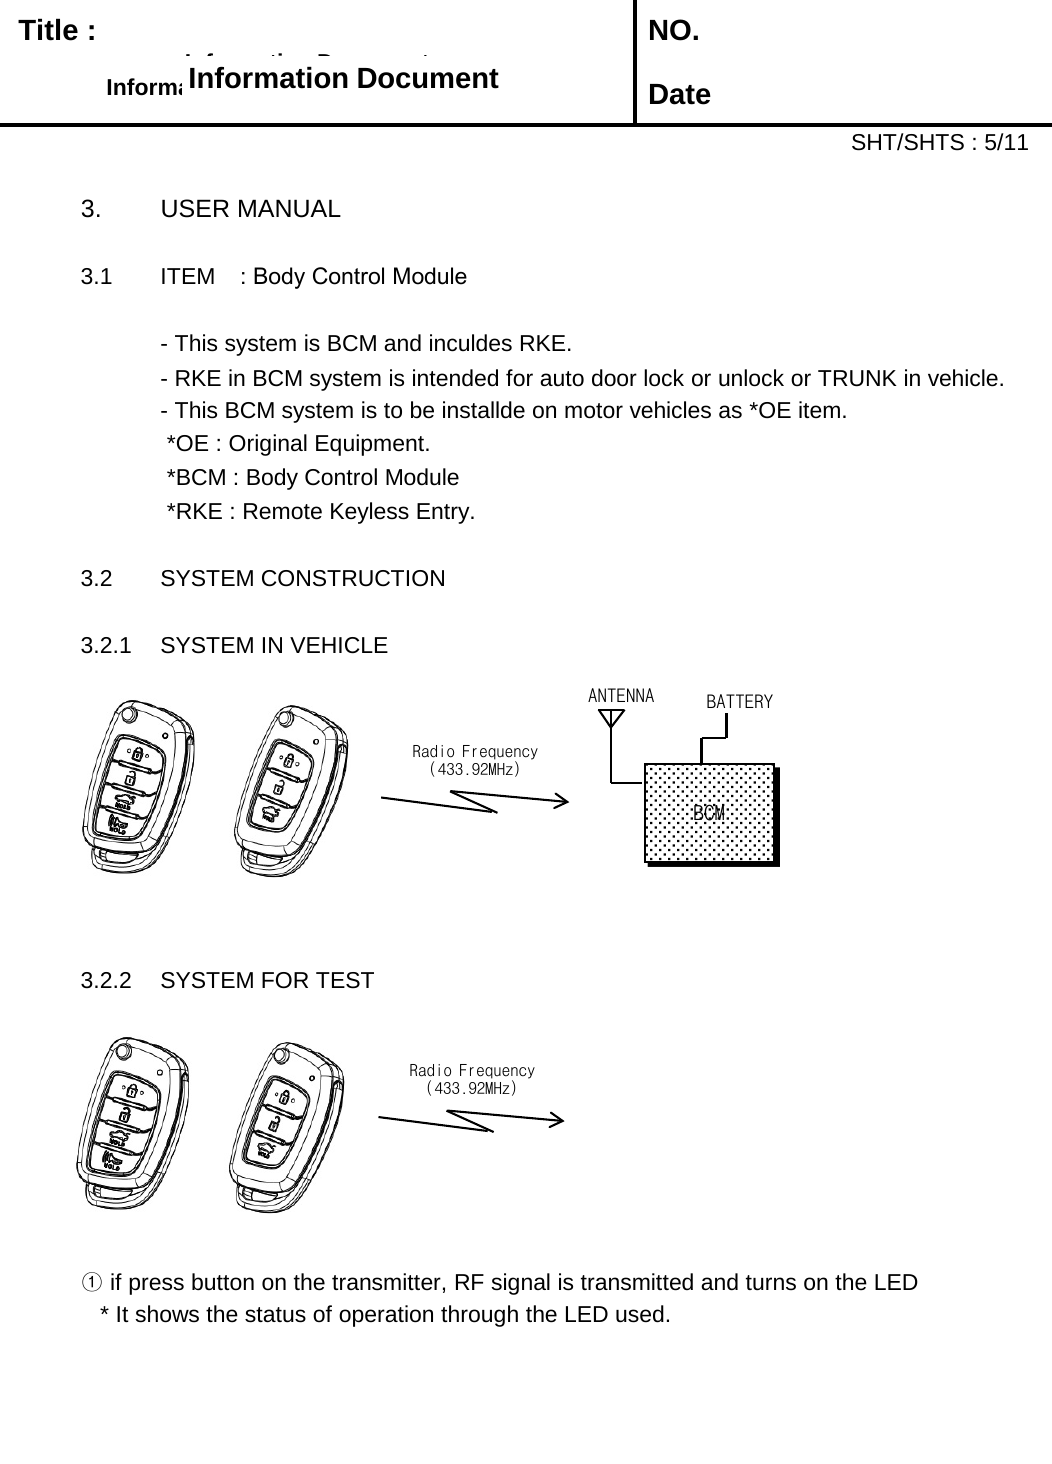   Title :  NO. DateSHT/SHTS : 5/113. USER MANUAL3.1 ITEM : Body Control Module- This system is BCM and inculdes RKE.  - RKE in BCM system is intended for auto door lock or unlock or TRUNK in vehicle. - This BCM system is to be installde on motor vehicles as *OE item.*OE : Original Equipment.*BCM : Body Control Module*RKE : Remote Keyless Entry.3.2 SYSTEM CONSTRUCTION3.2.1 SYSTEM IN VEHICLE3.2.2 SYSTEM FOR TEST①if press button on the transmitter, RF signal is transmitted and turns on the LED* It shows the status of operation through the LED used.Information DocumentInformation DocumentInformation DocumentInformation DocumentRadio Frequency(433.92MHz)ANTENNABATTERYBCMRadio Frequency(433.92MHz)